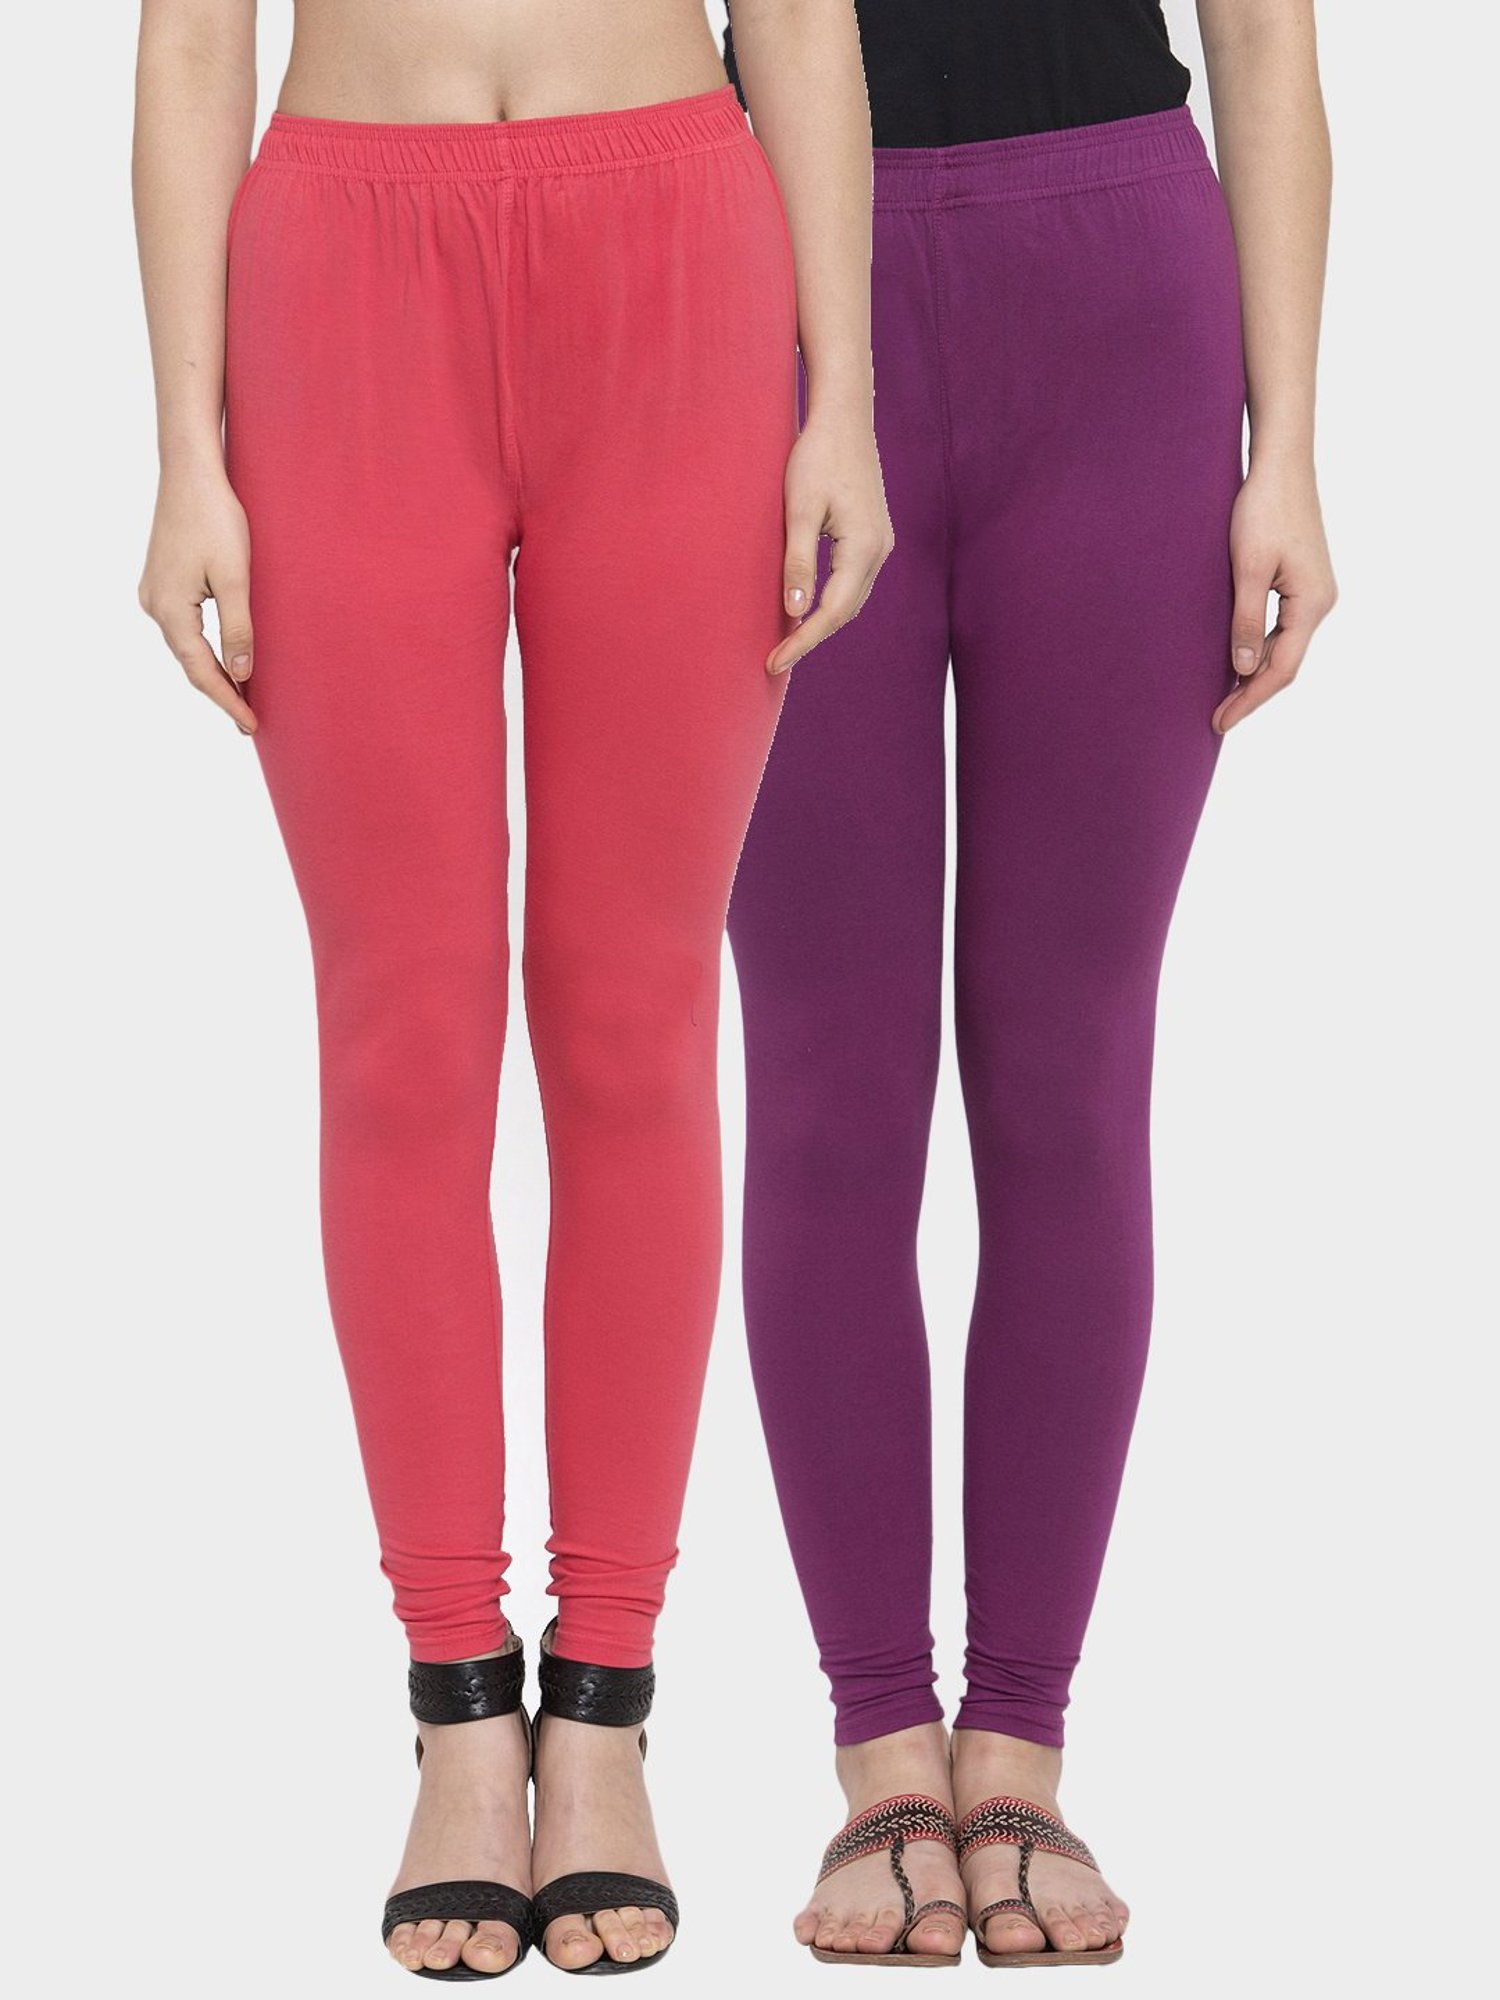 Buy AND Women Pink & Purple Colourblocked Activewear Knitted Tights - Tights  for Women 10364589 | Myntra